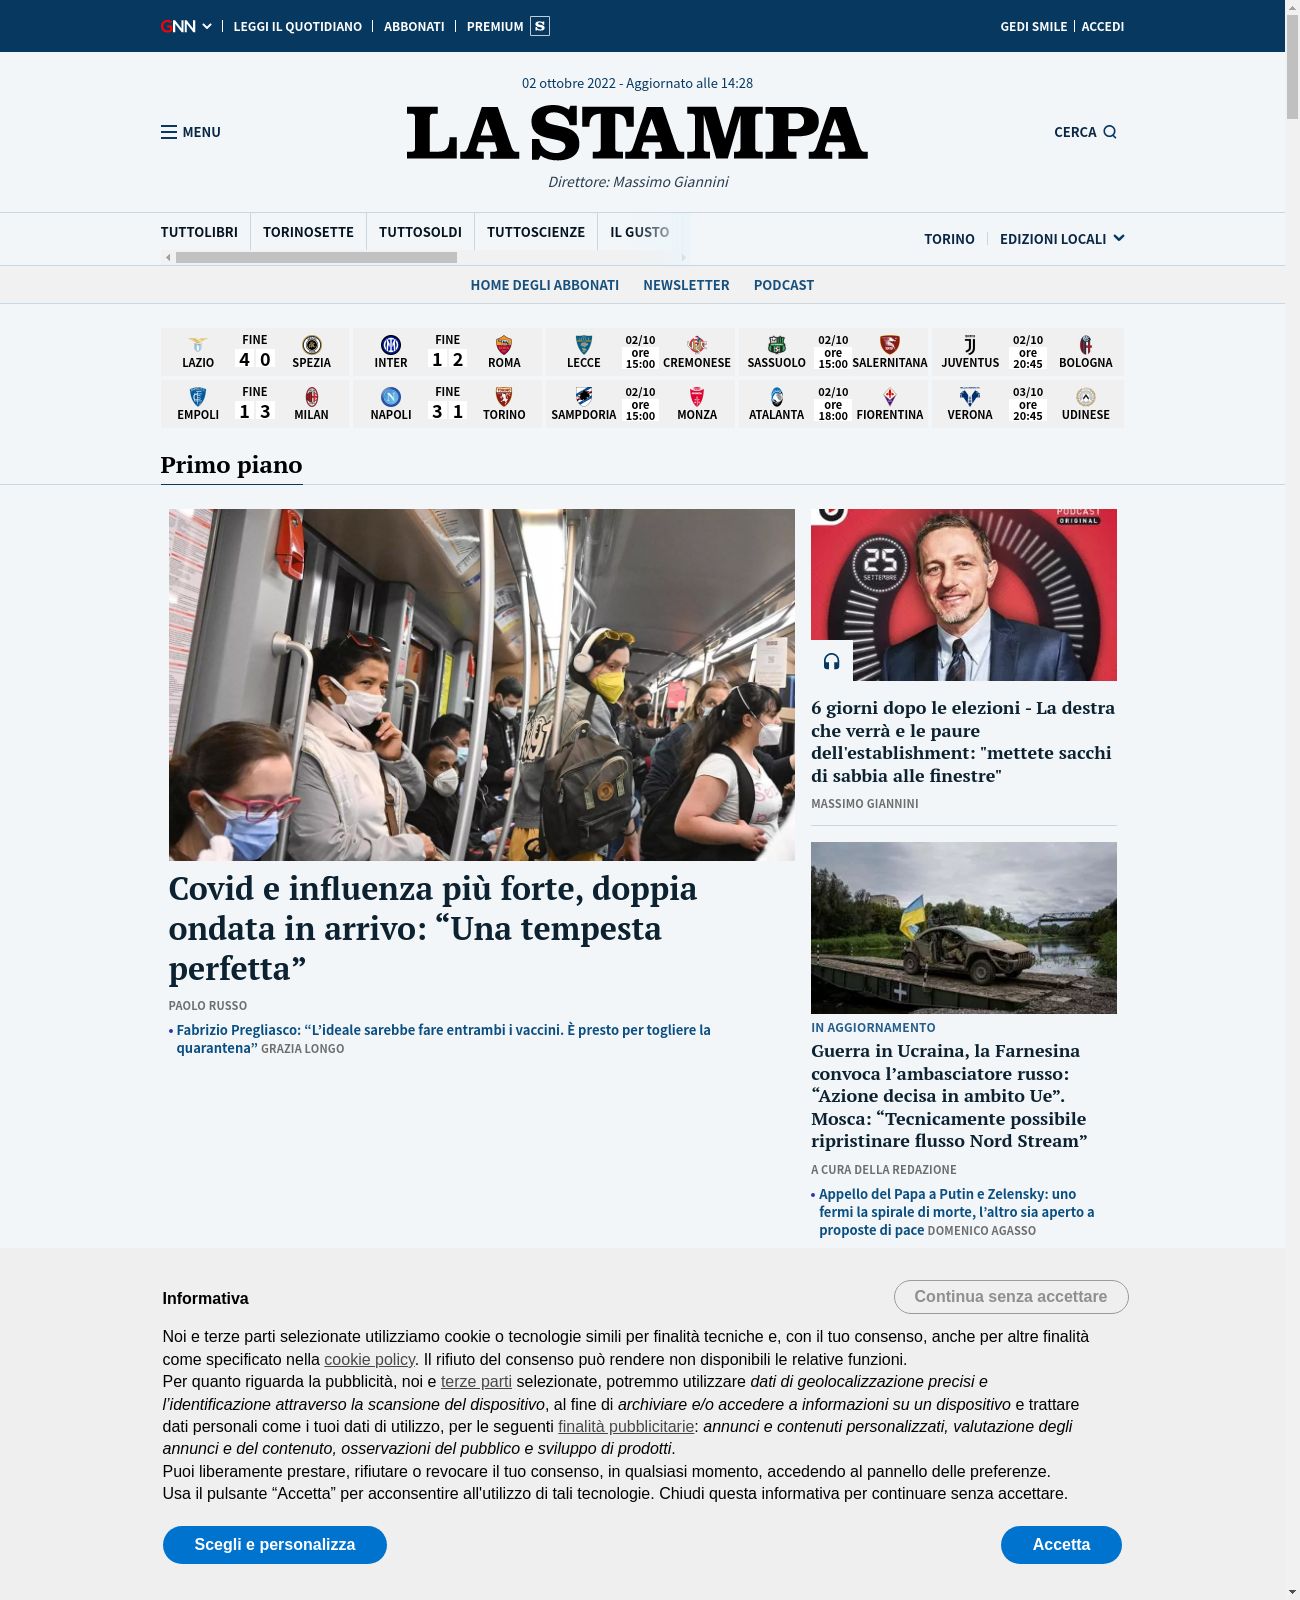 La Stampa at 2022-10-02 14:58:41+02:00 local time